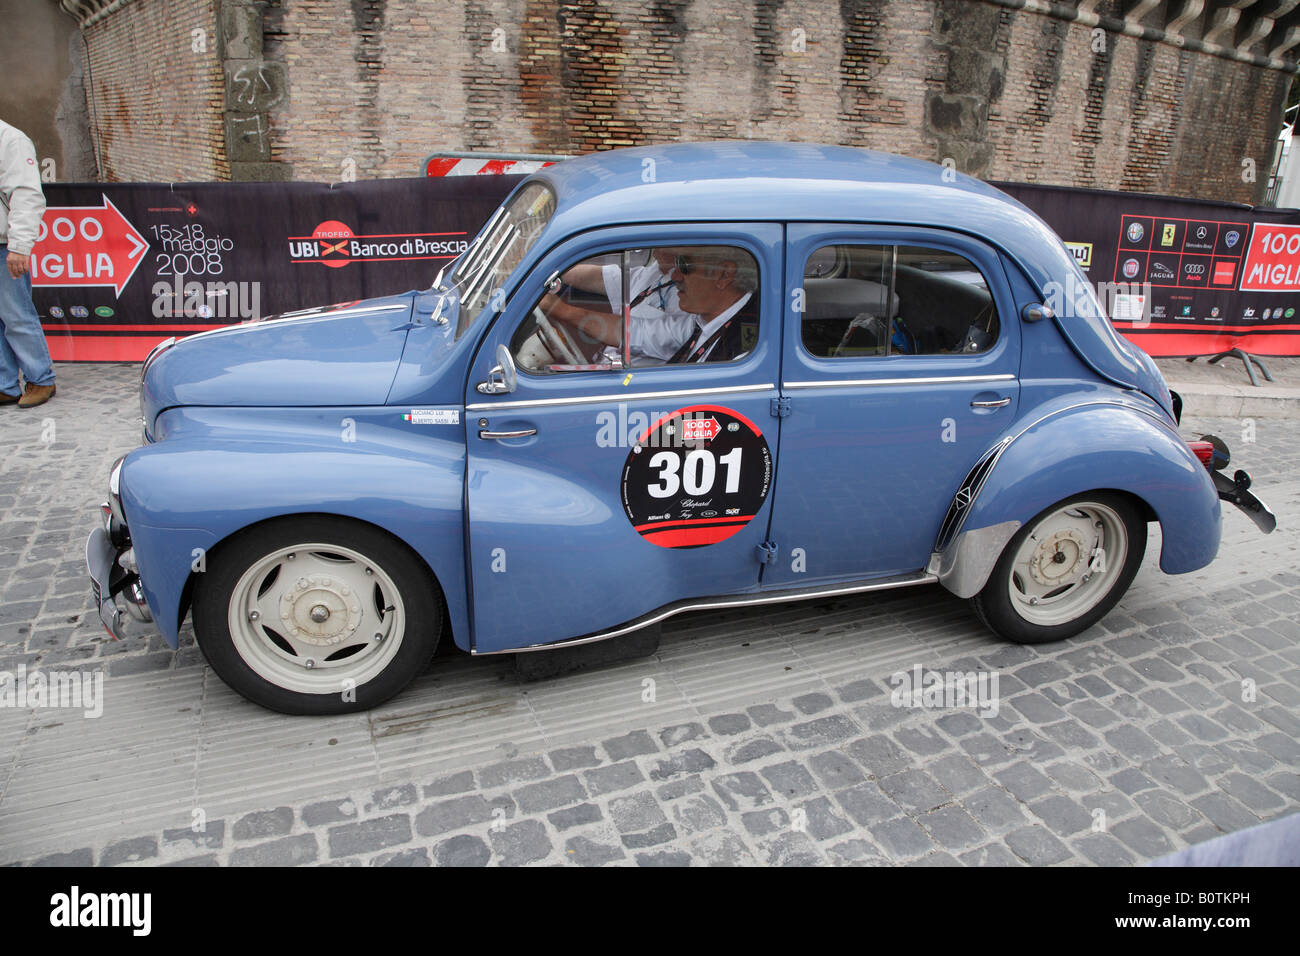 1957 RENAULT 4CV at castel Sant Angelo leaving Rome on third and last leg of mille miglia classic car rally 2008 Stock Photo